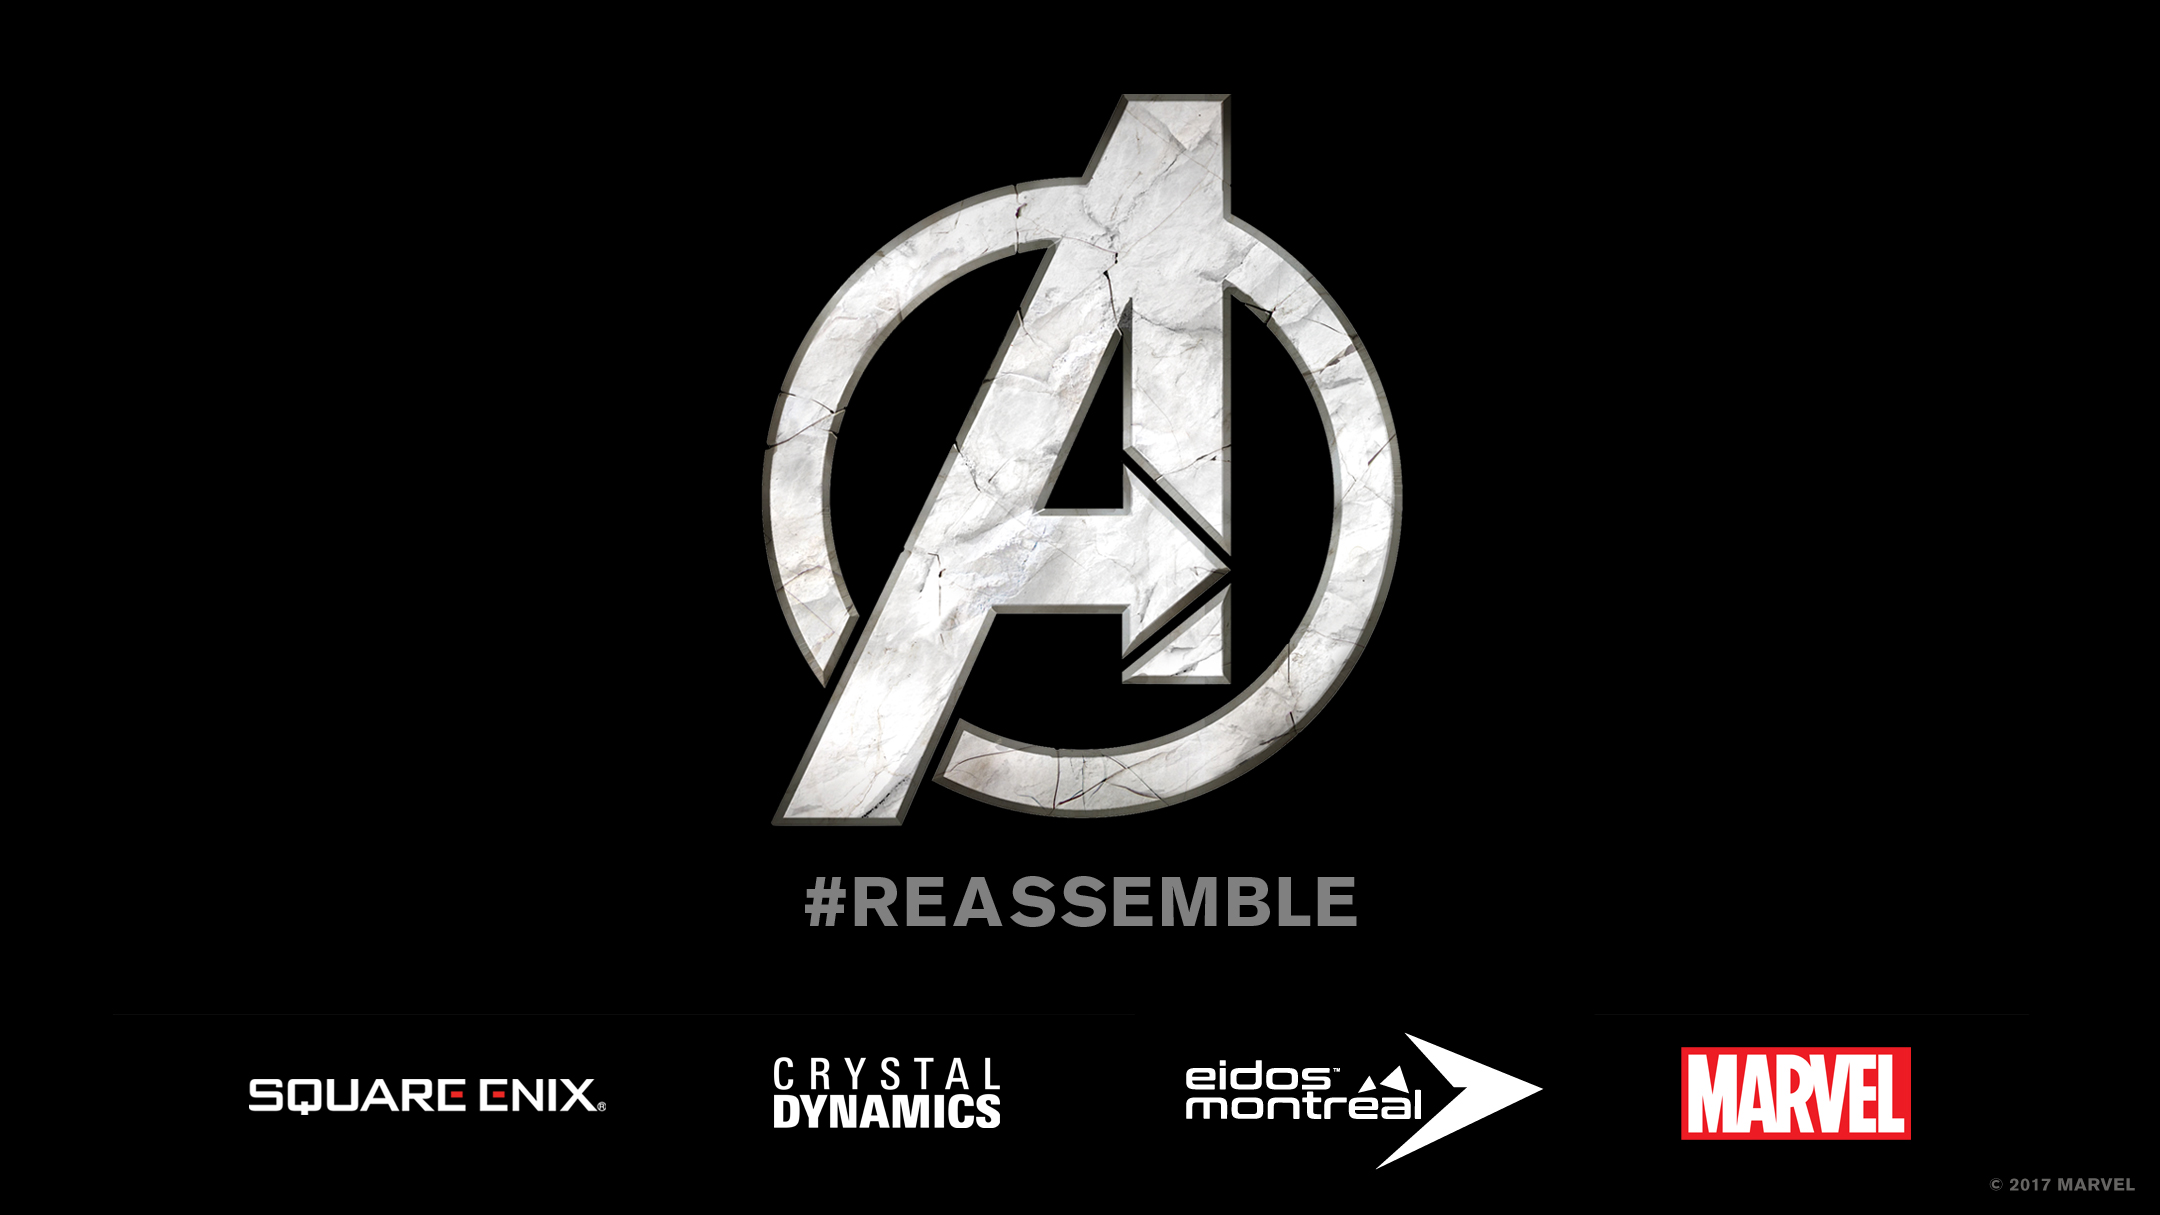 Square Enix Working With Marvel; Announces Project Avengers